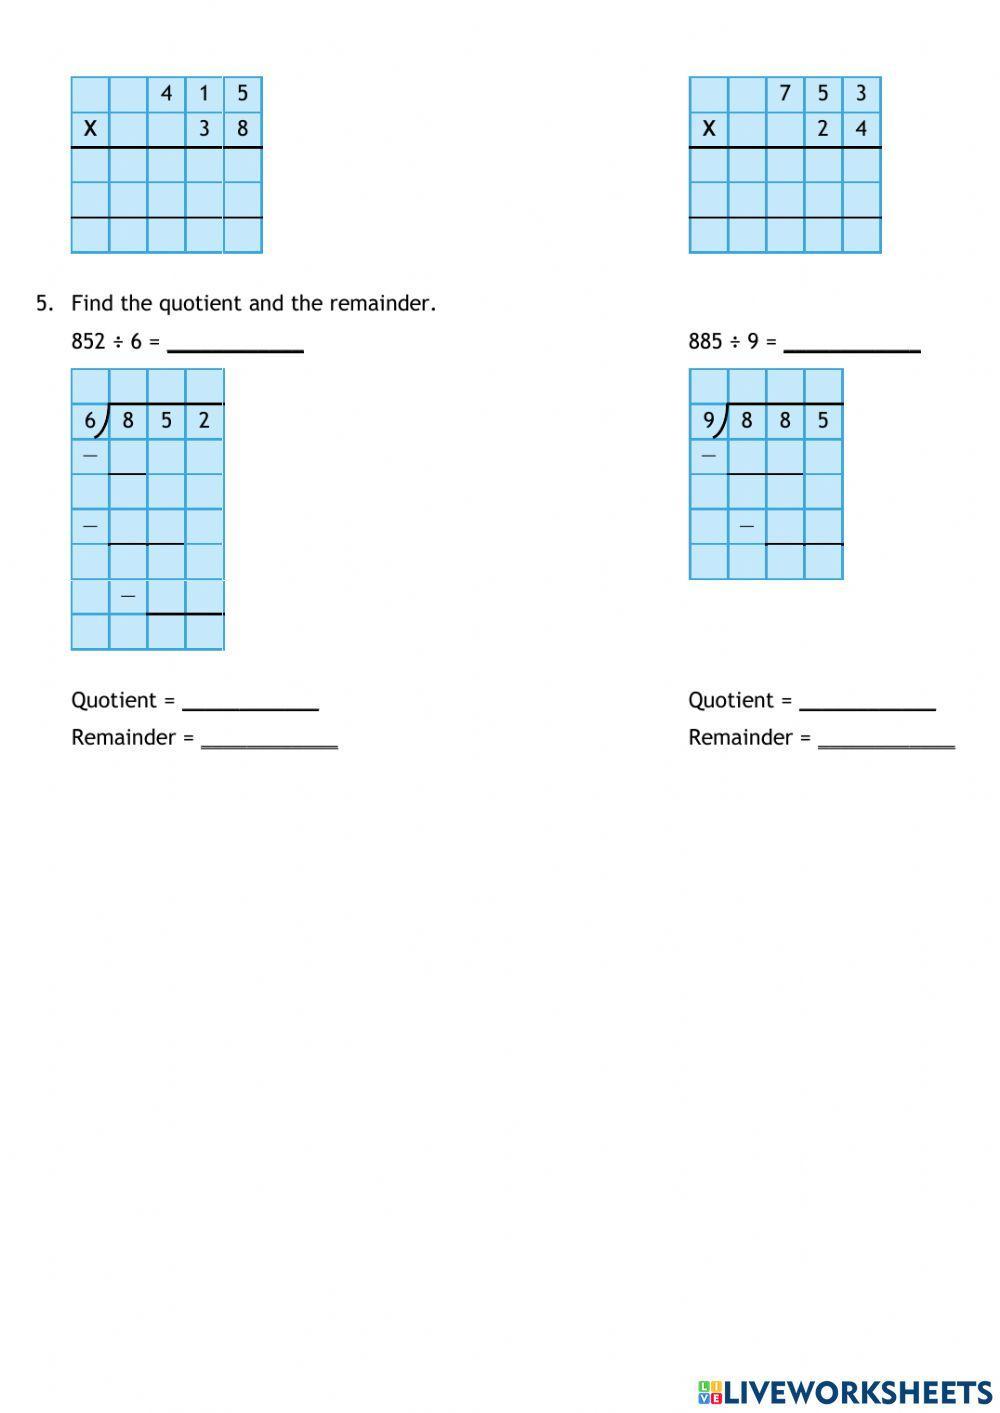 Chapter 3 Review: Multiplication and Division